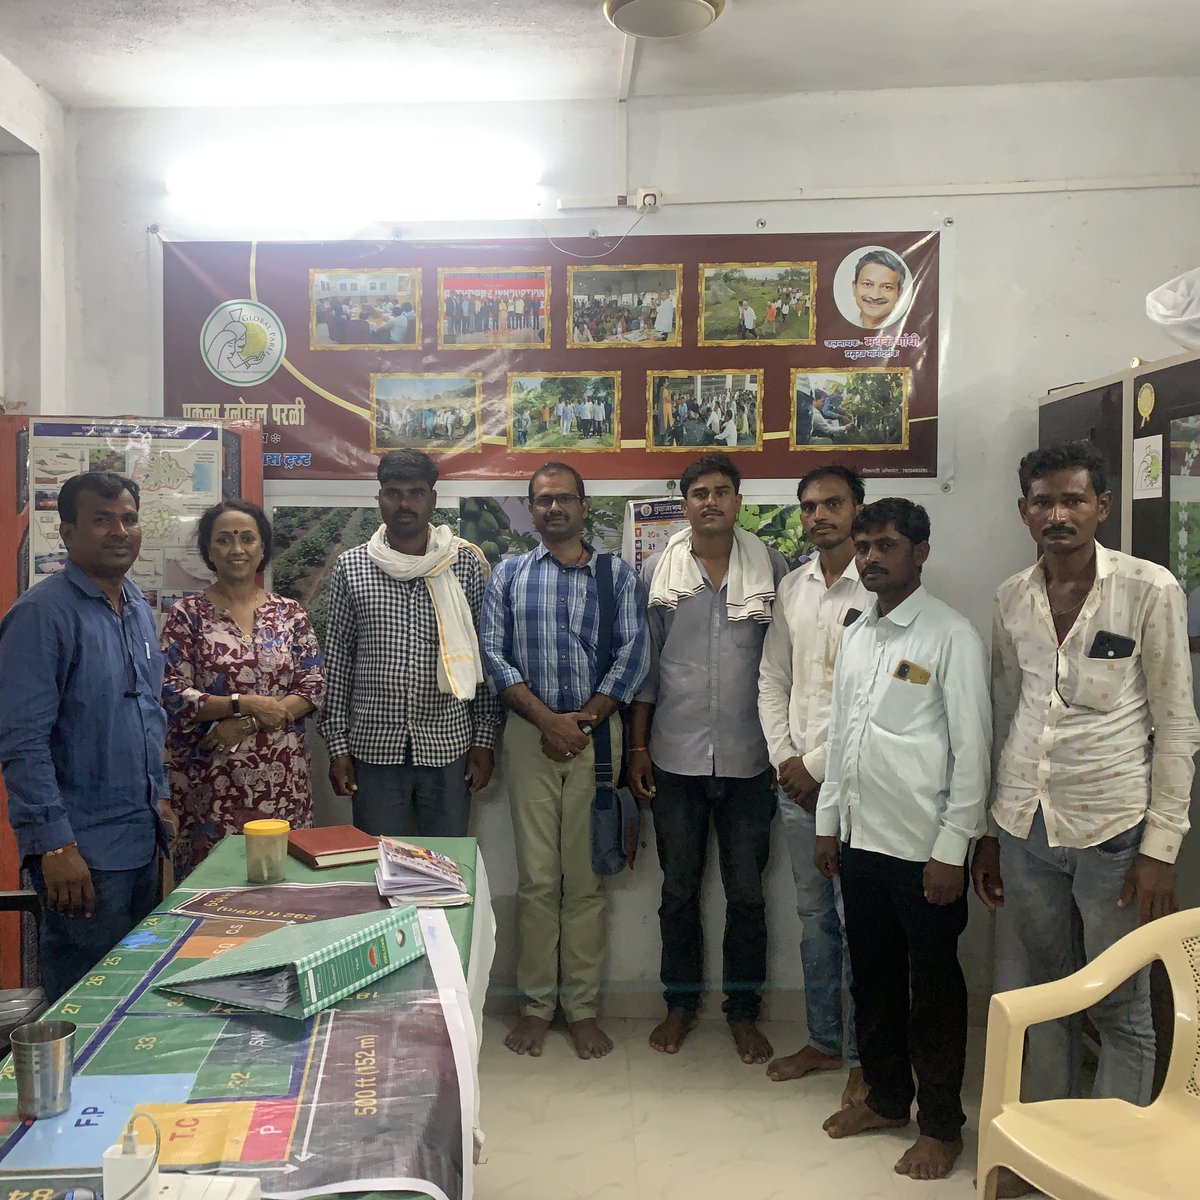 Interacted with Young farmer’s at @GlobalParli office along with @mayankgandhi04 sir, and  Agronamists.

#Agriculture #AgriculturePolicy #thinktank #WIF #worldintellectualfoundation
#dranrreddy